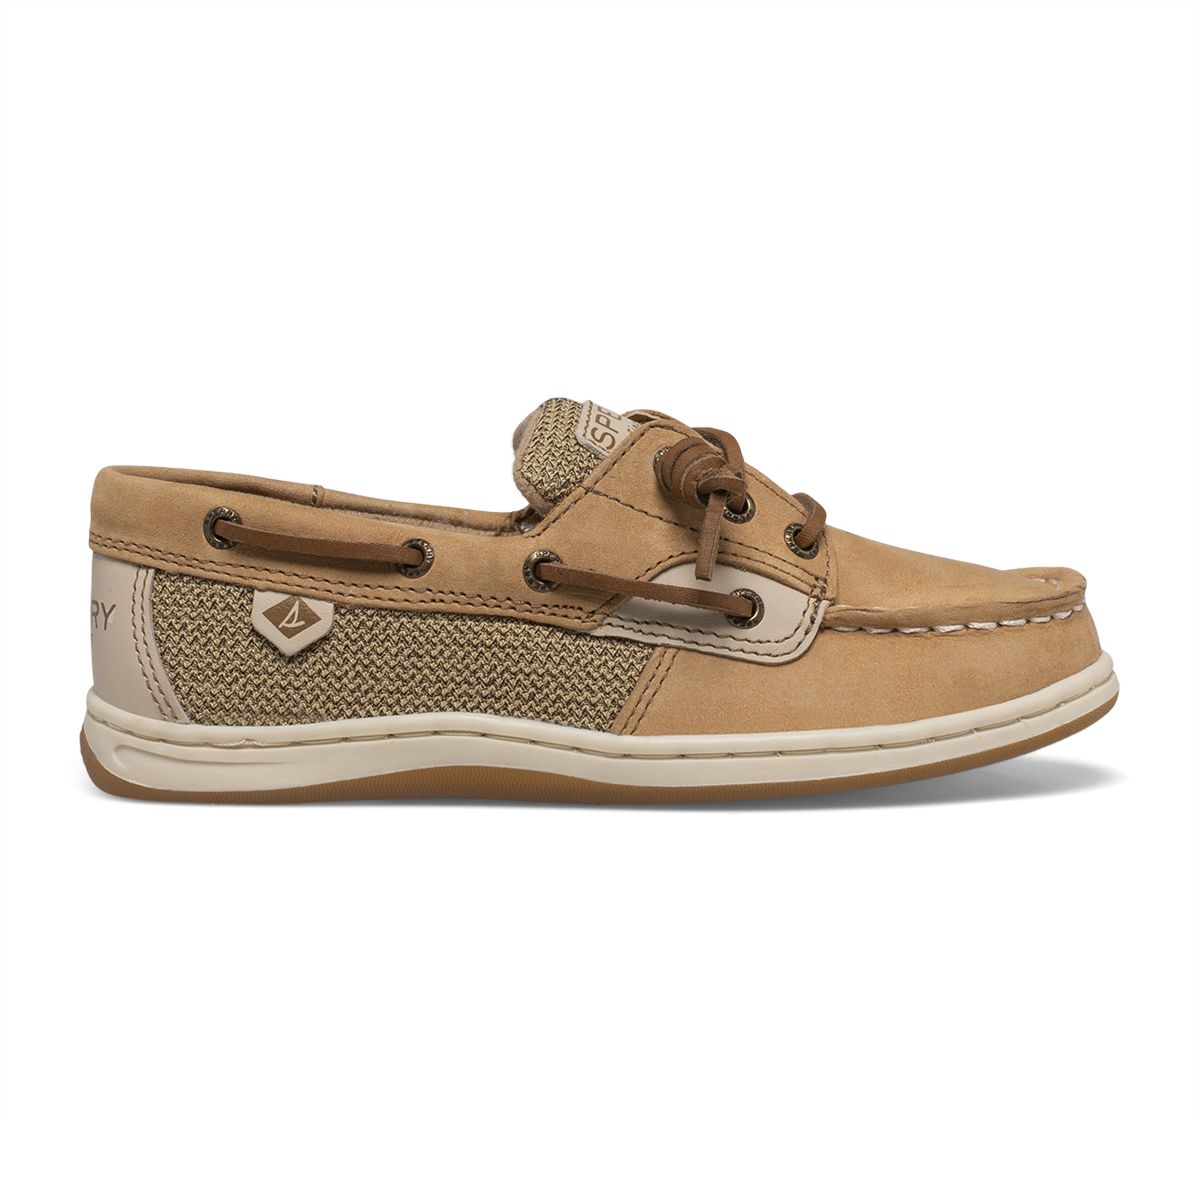 Big Kid's Songfish Boat Shoe - Kids' Boat Shoes | Sperry